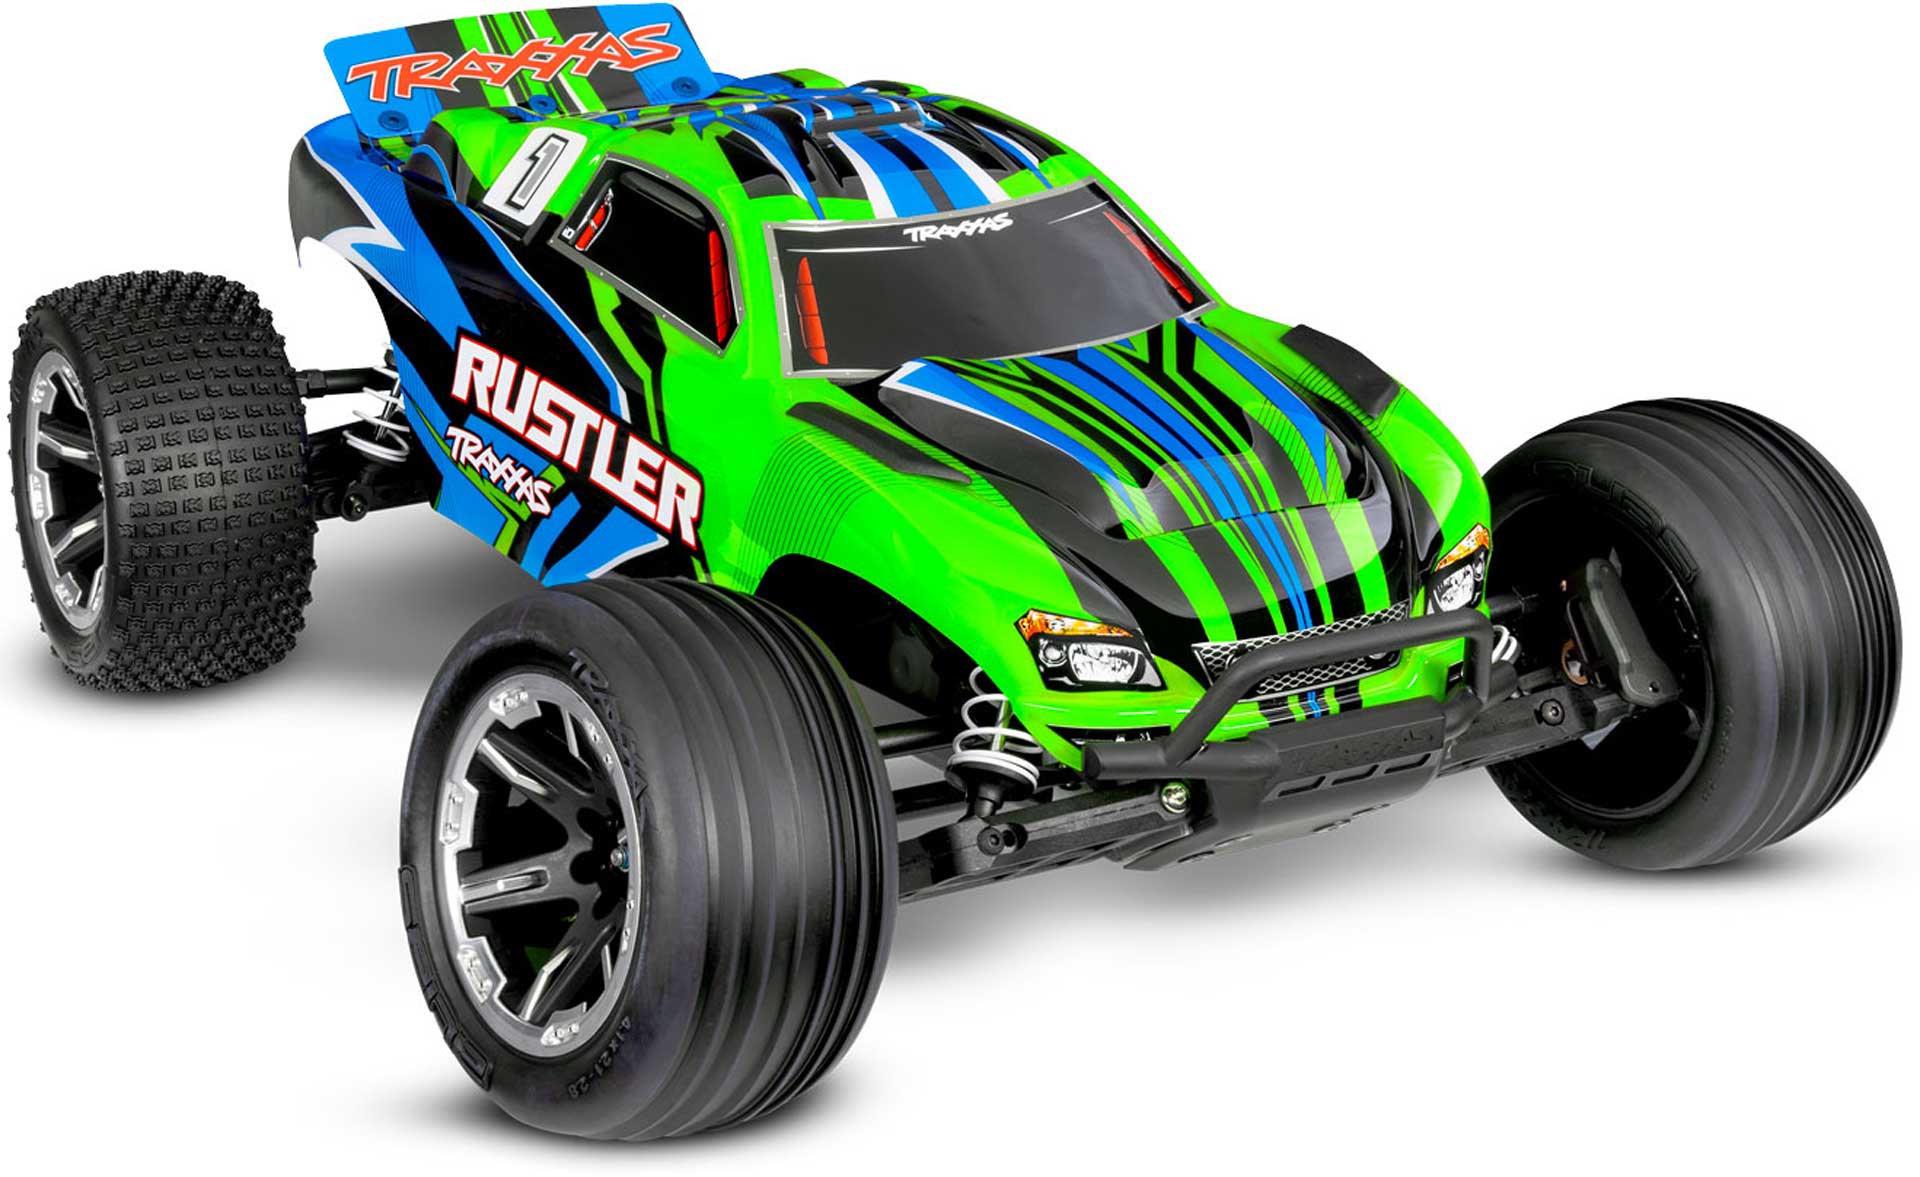 TRAXXAS RUSTLER ORANGE 1/10 2WD STADIUM- TRUCK RTR BRUSHED, HD, WITH BATTERY AND